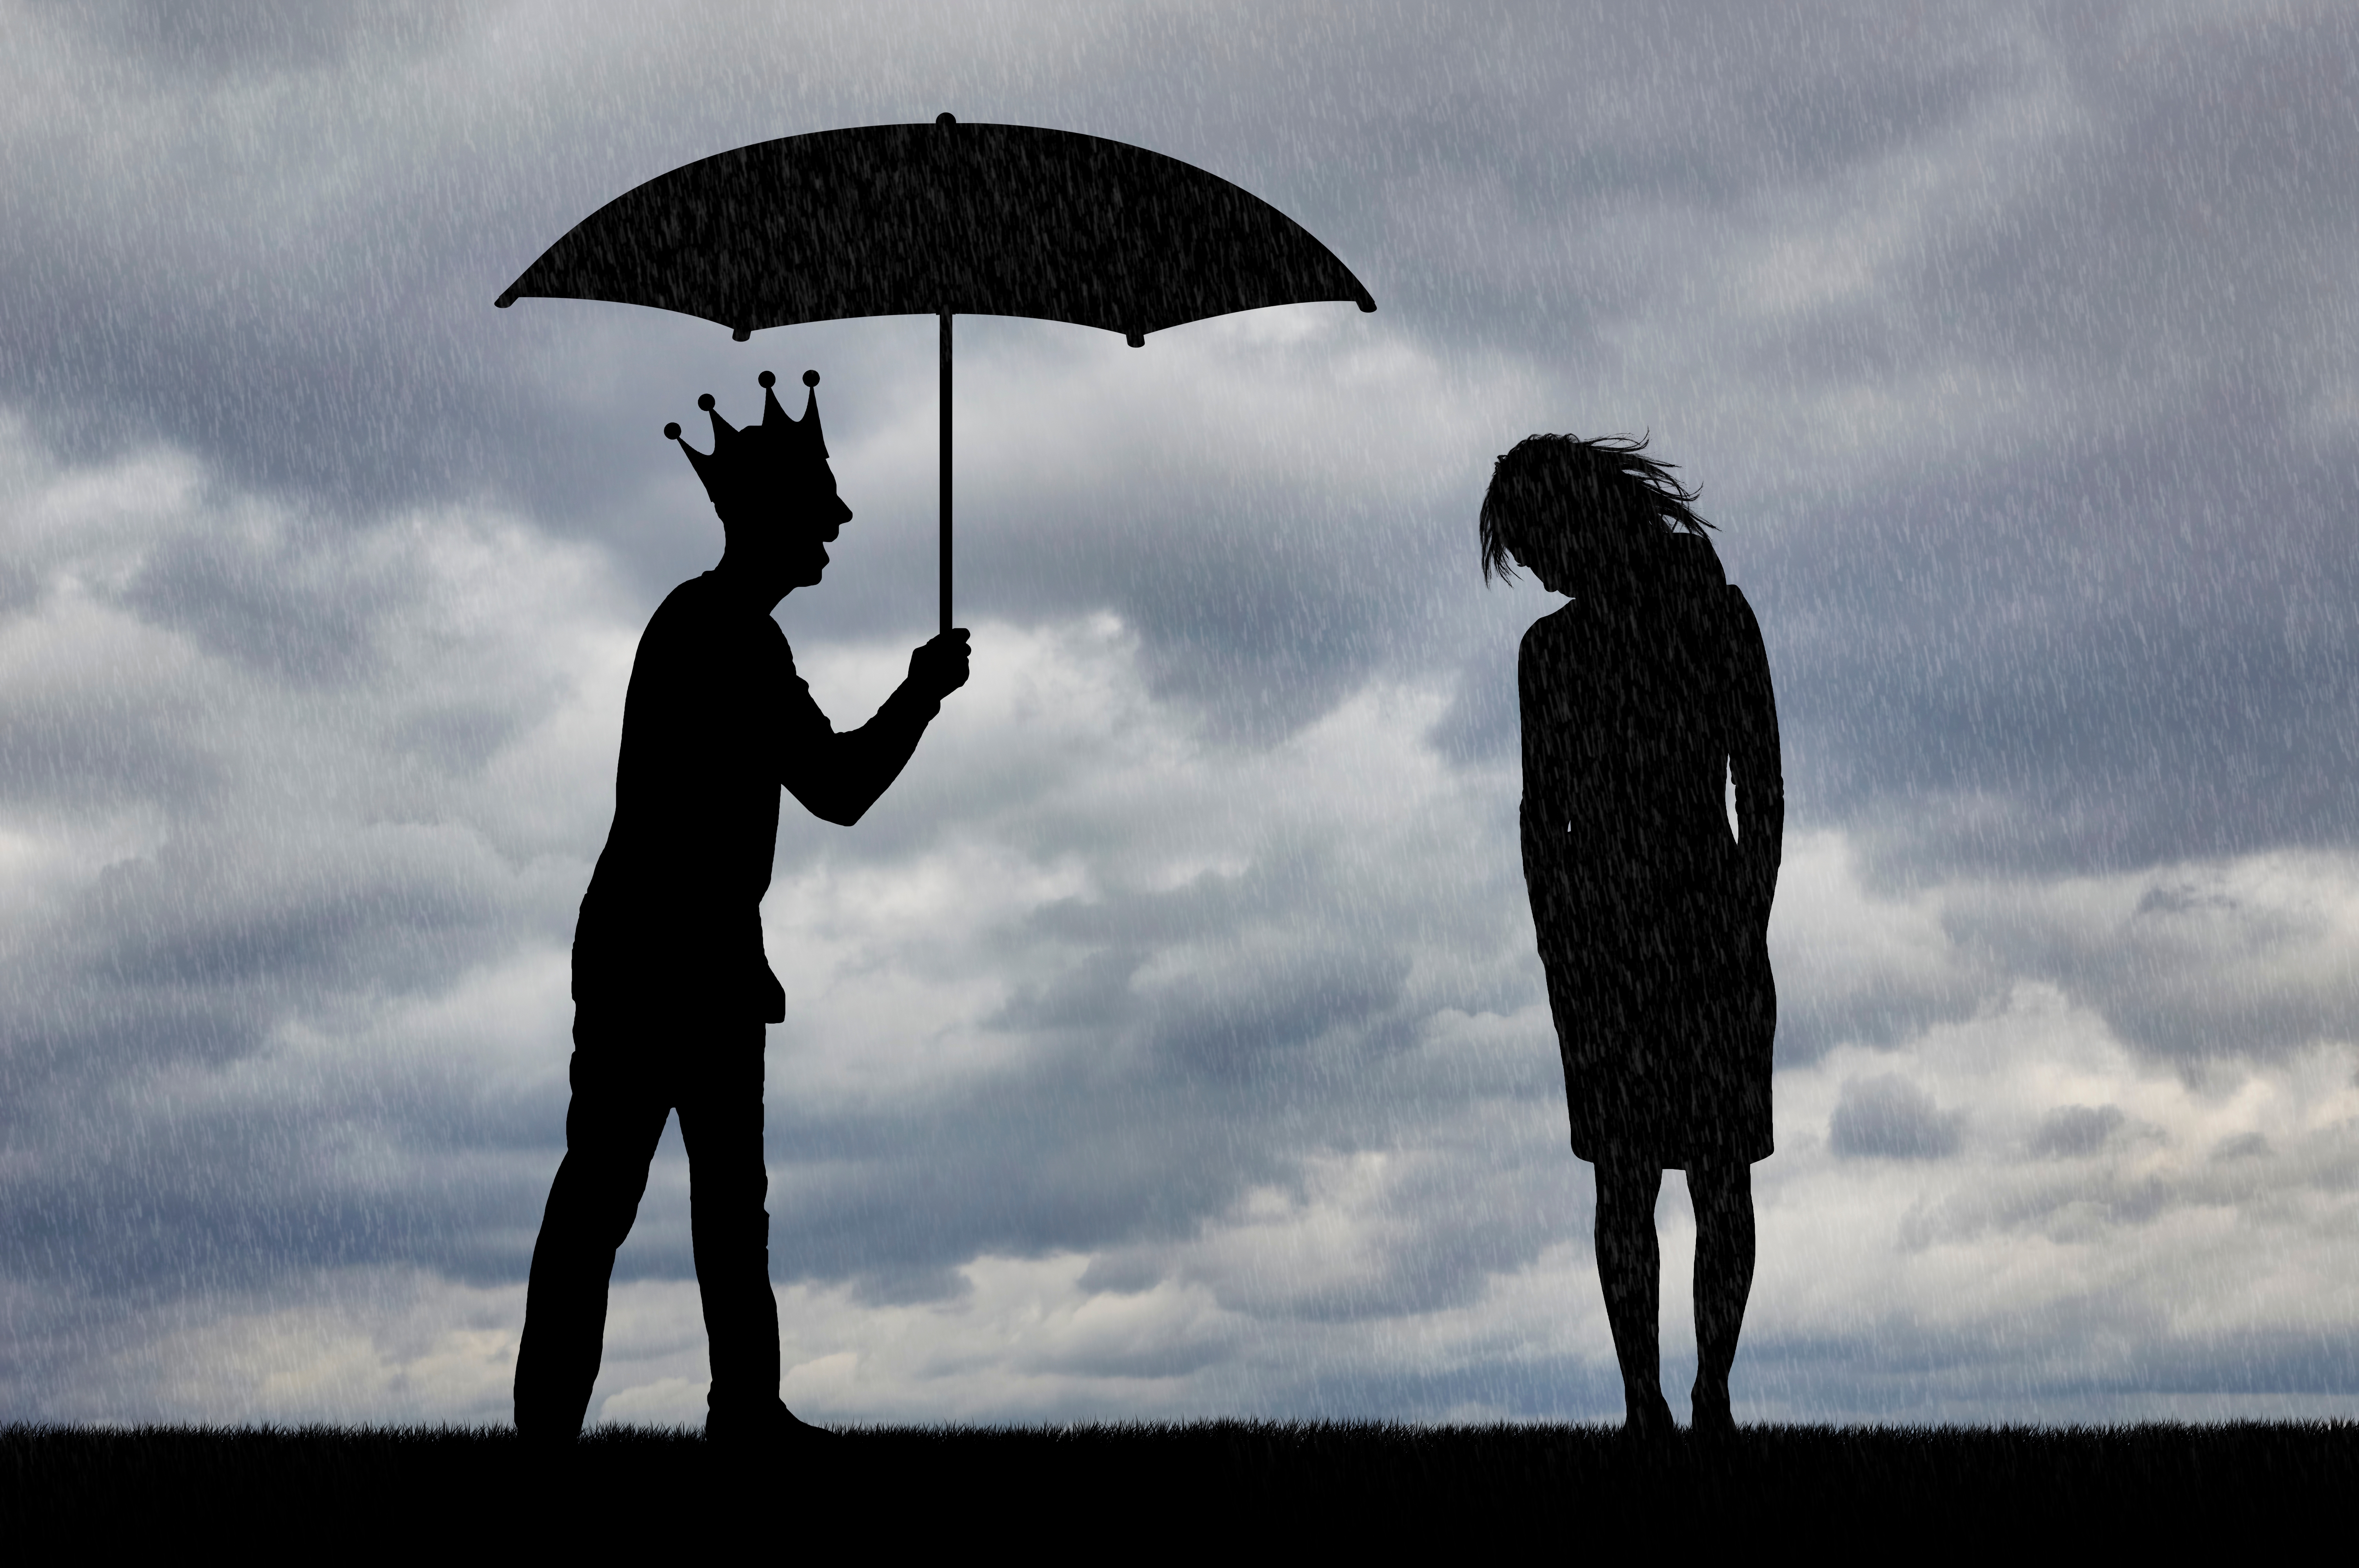 Silhouette of a sad woman and a man with a crown on and an umbrella over his head